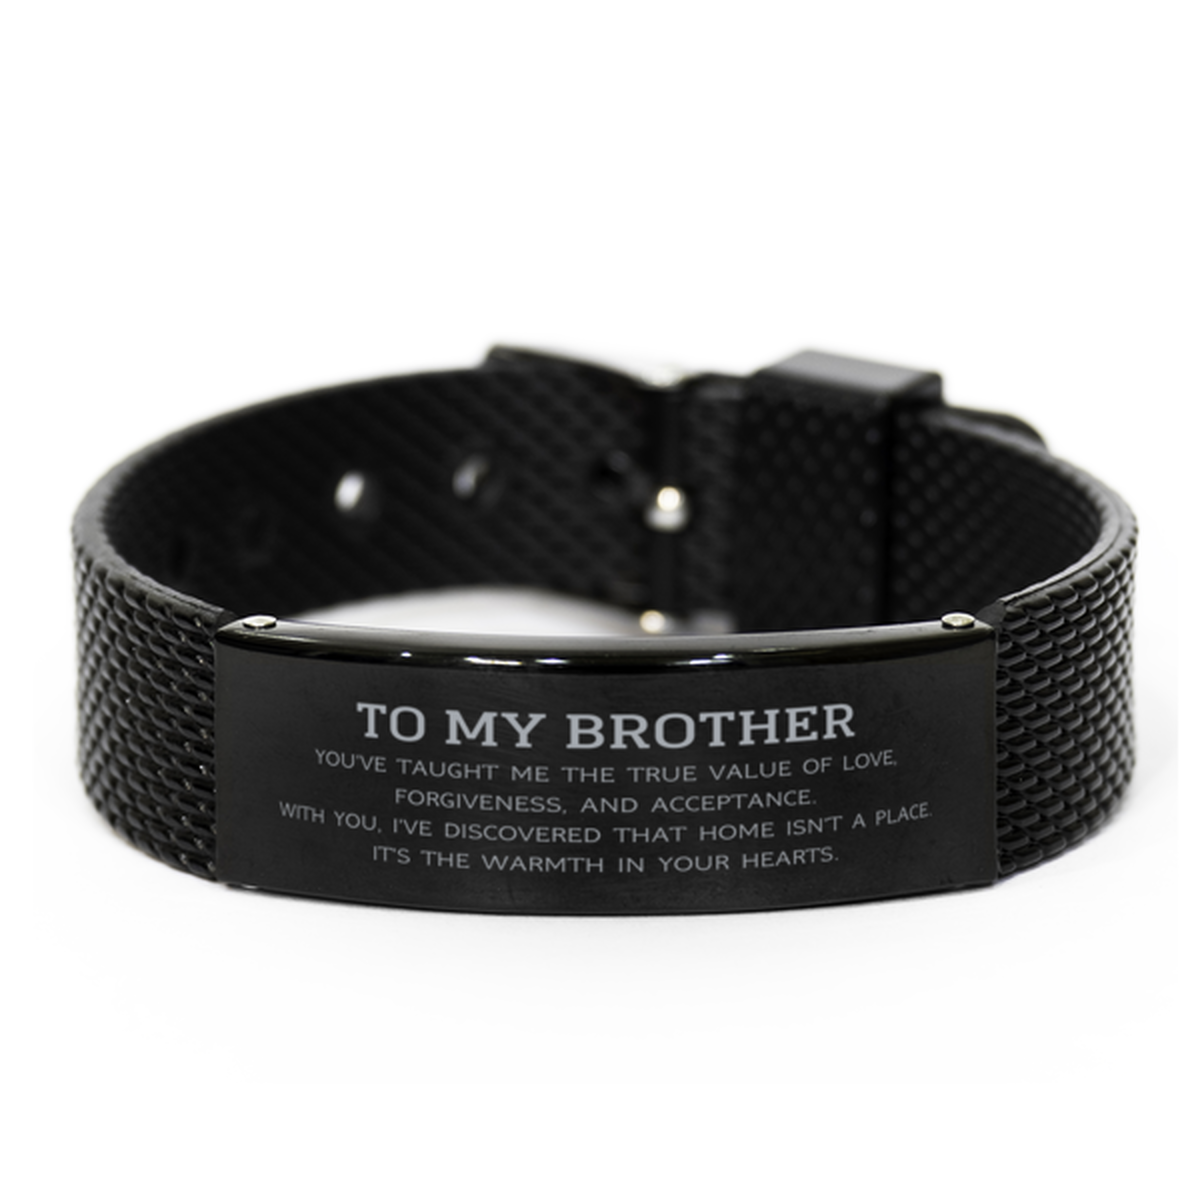 To My Brother Gifts, You've taught me the true value of love, Thank You Gifts For Brother, Birthday Black Shark Mesh Bracelet For Brother